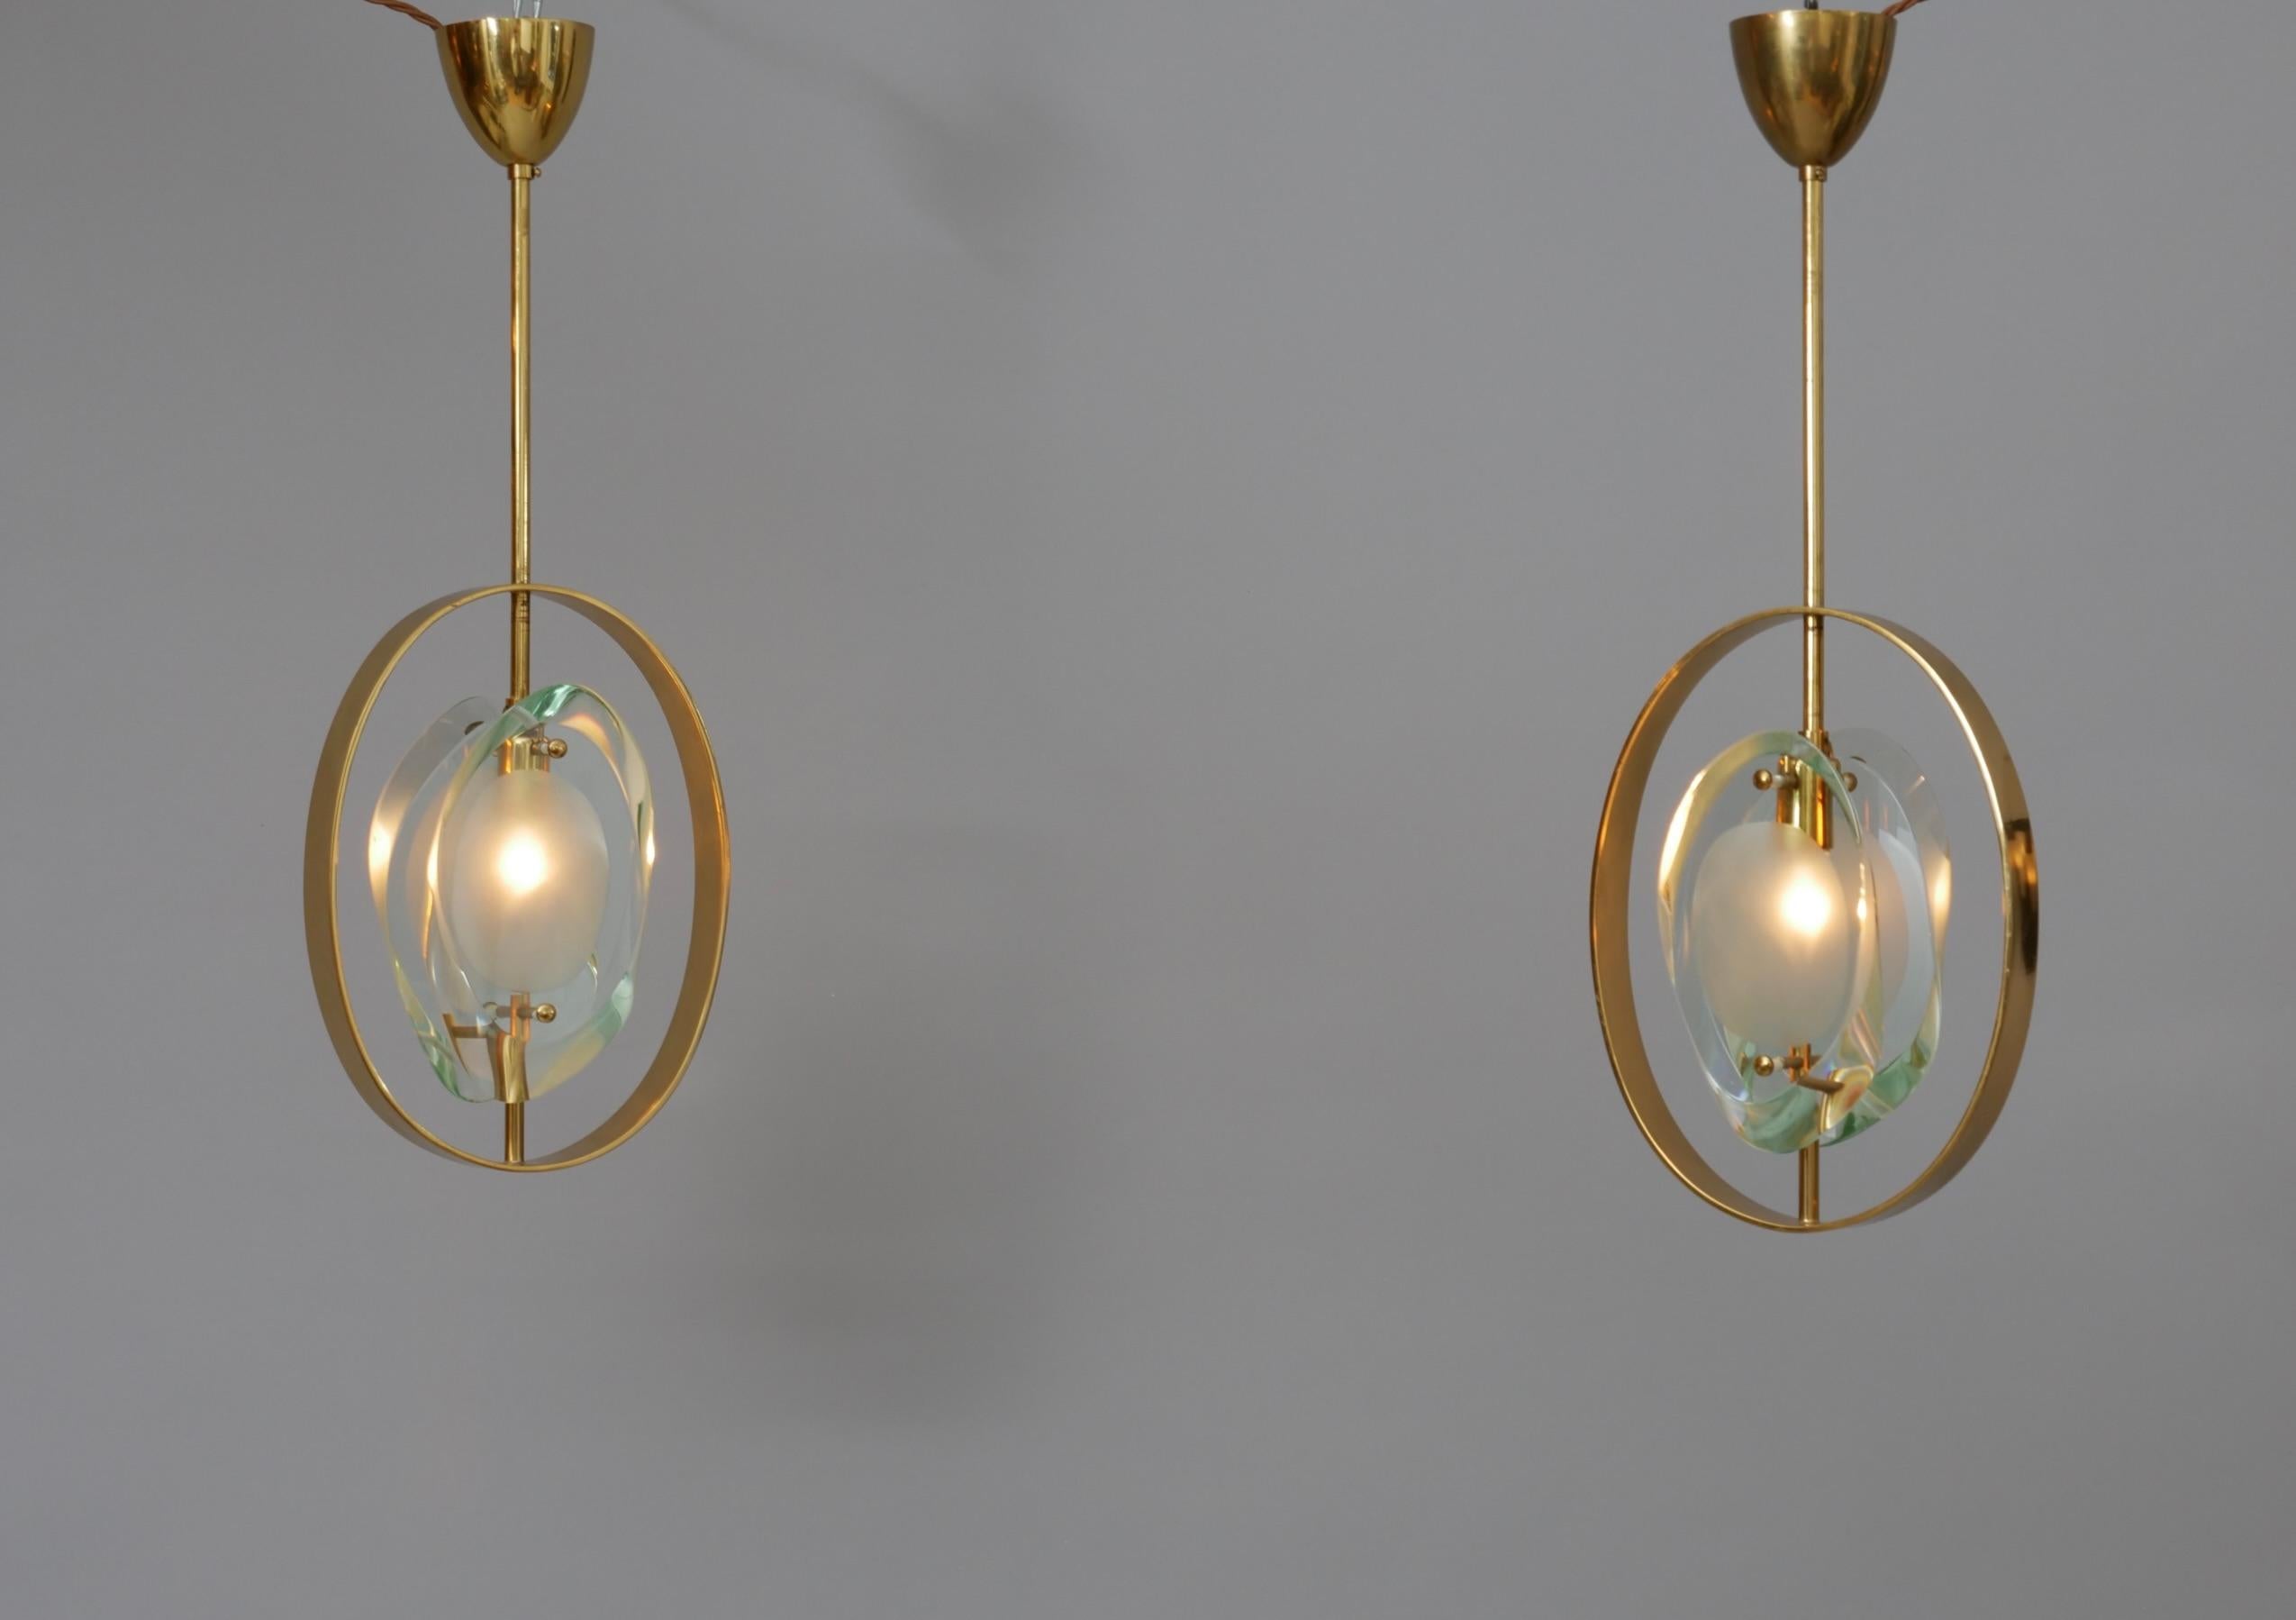 Rare pair original Max Ingrand pendents

Double lens cut panels of thick profiled polished glass with satin finished glass centres

In excellent condition. 

No chips or cracks. Lovely patina to brass